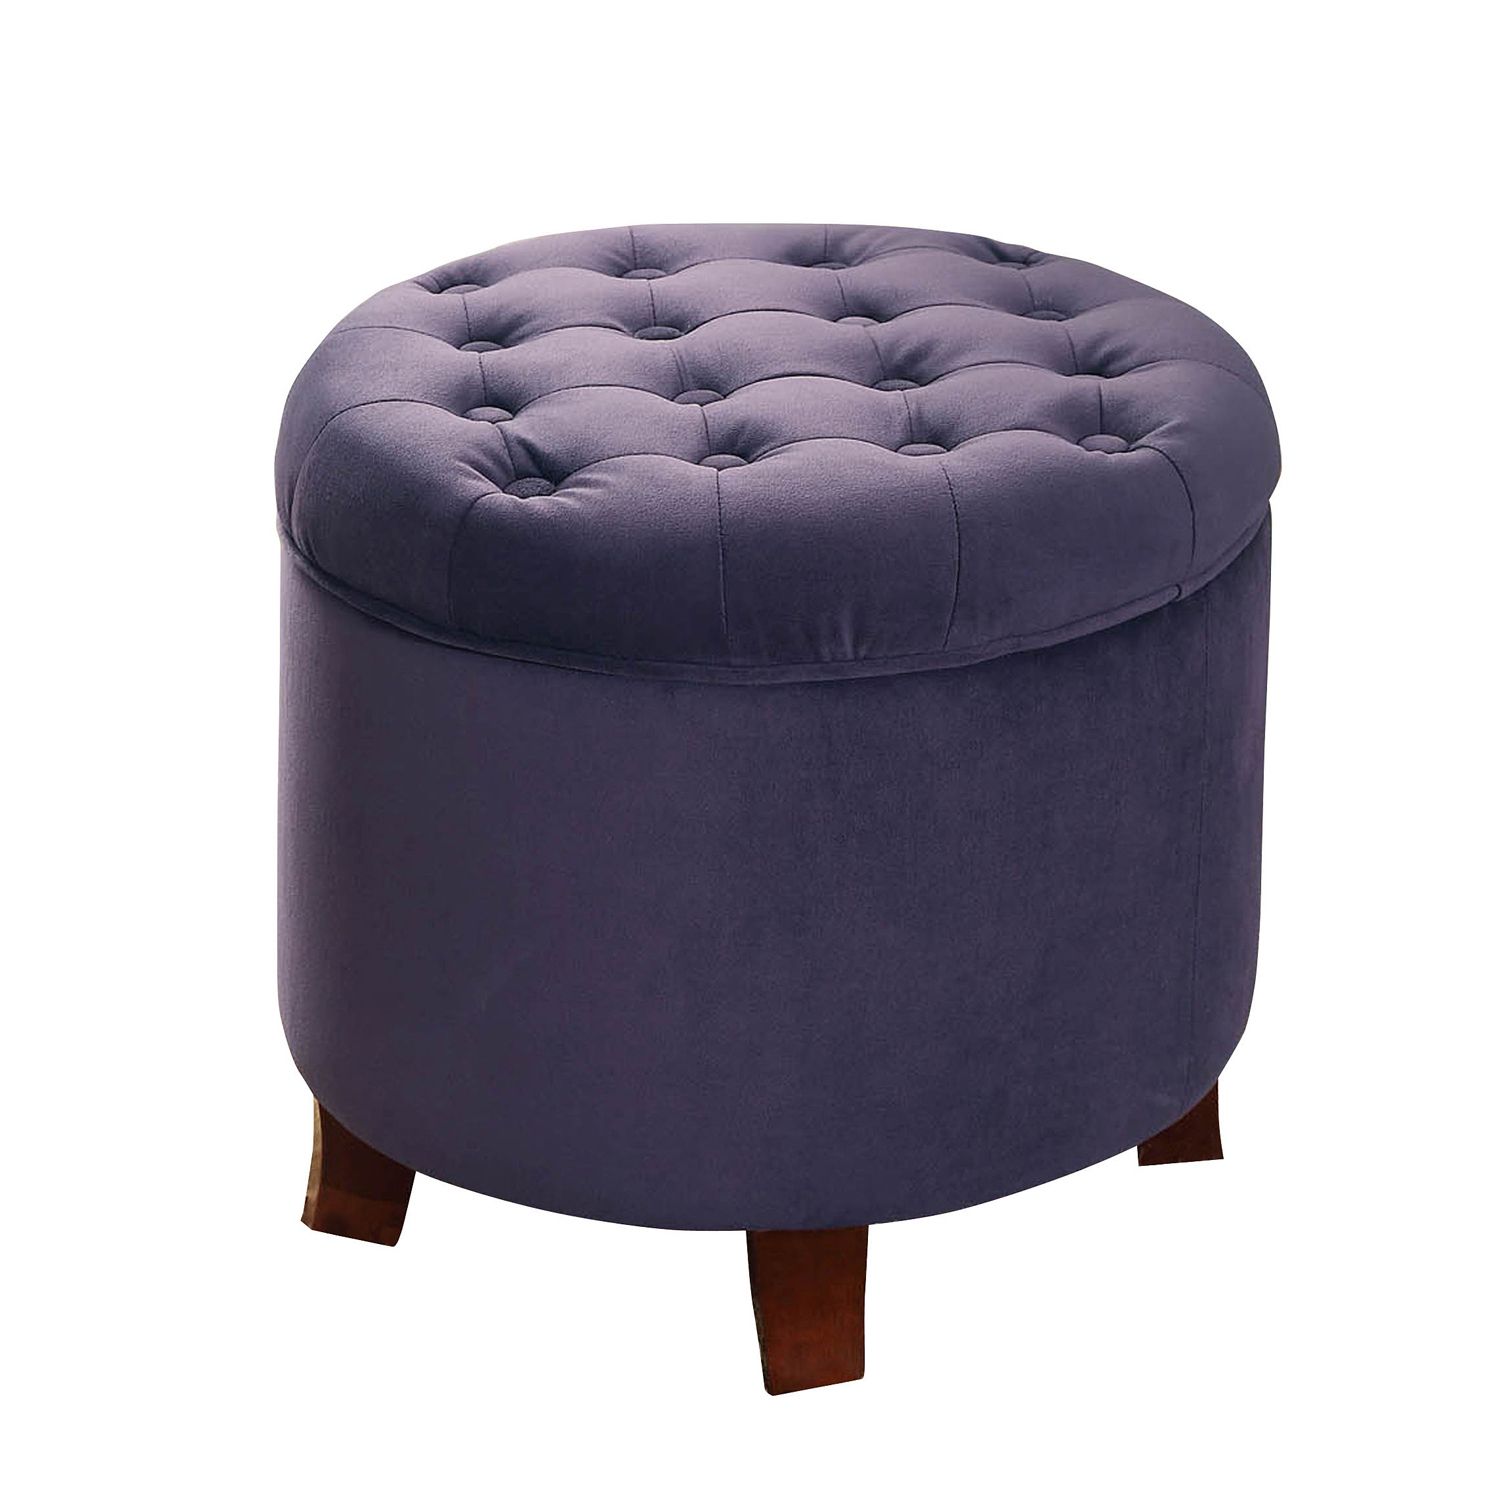 Fabric Tufted Round Storage Ottomans With 2019 Purple Velvet Tufted Round Storage Ottoman – Pier1 Imports (View 2 of 10)